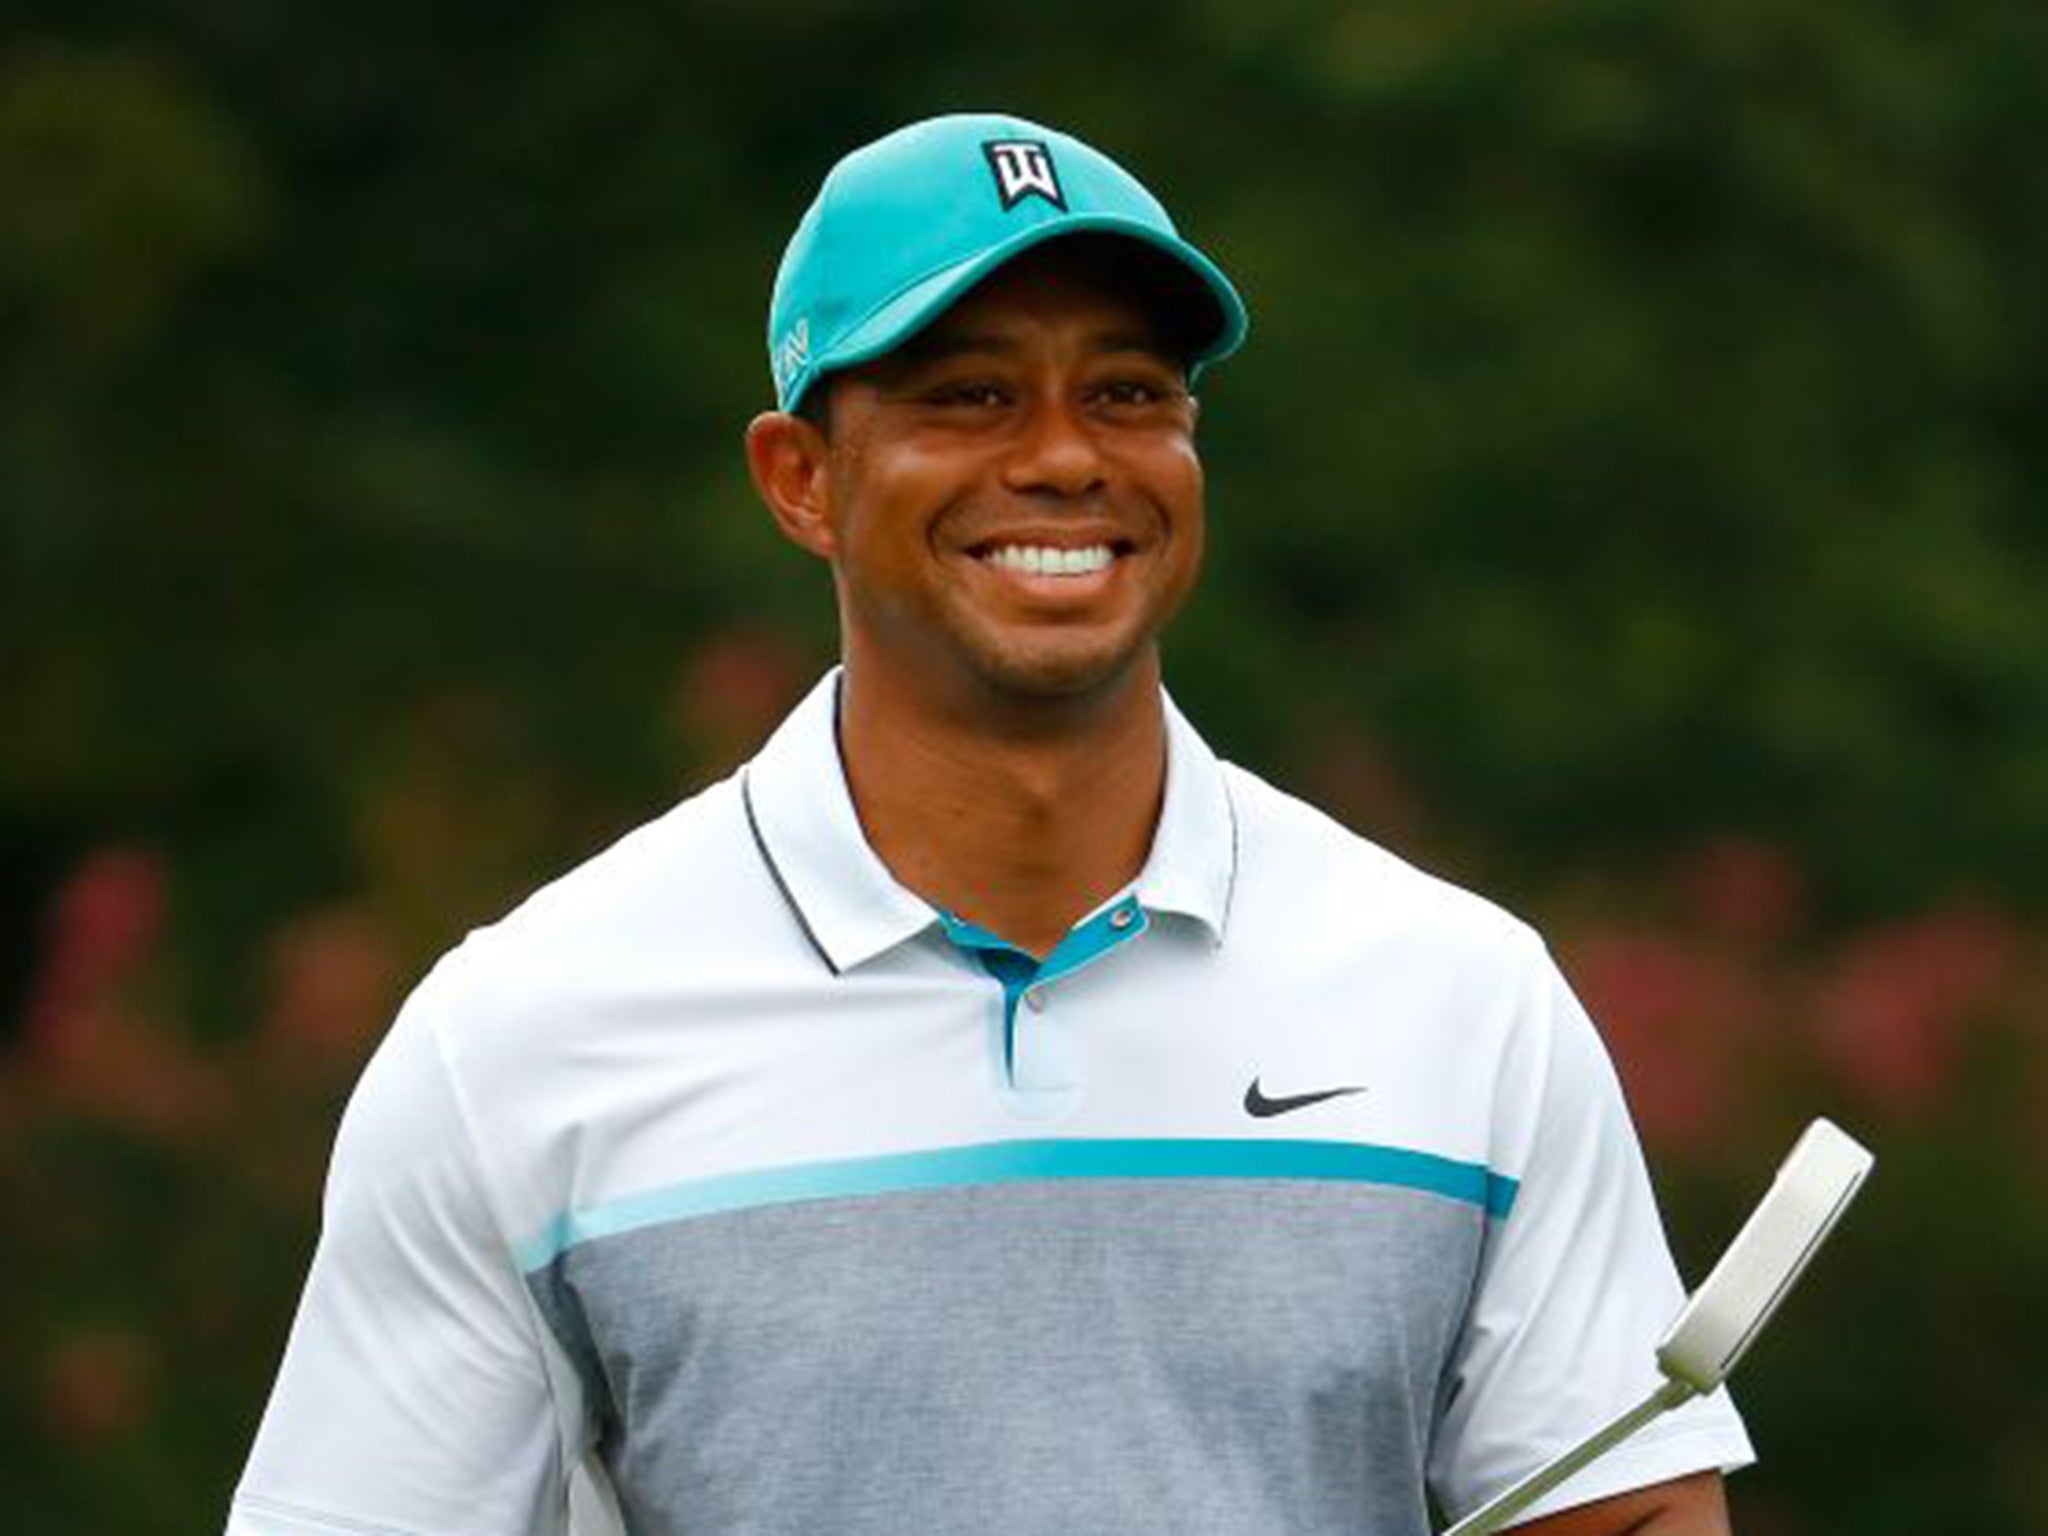 Tiger Woods is all smiles after sinking a birdie at the Wyndham Championship back in August before undergoing a third back operation in 18 months